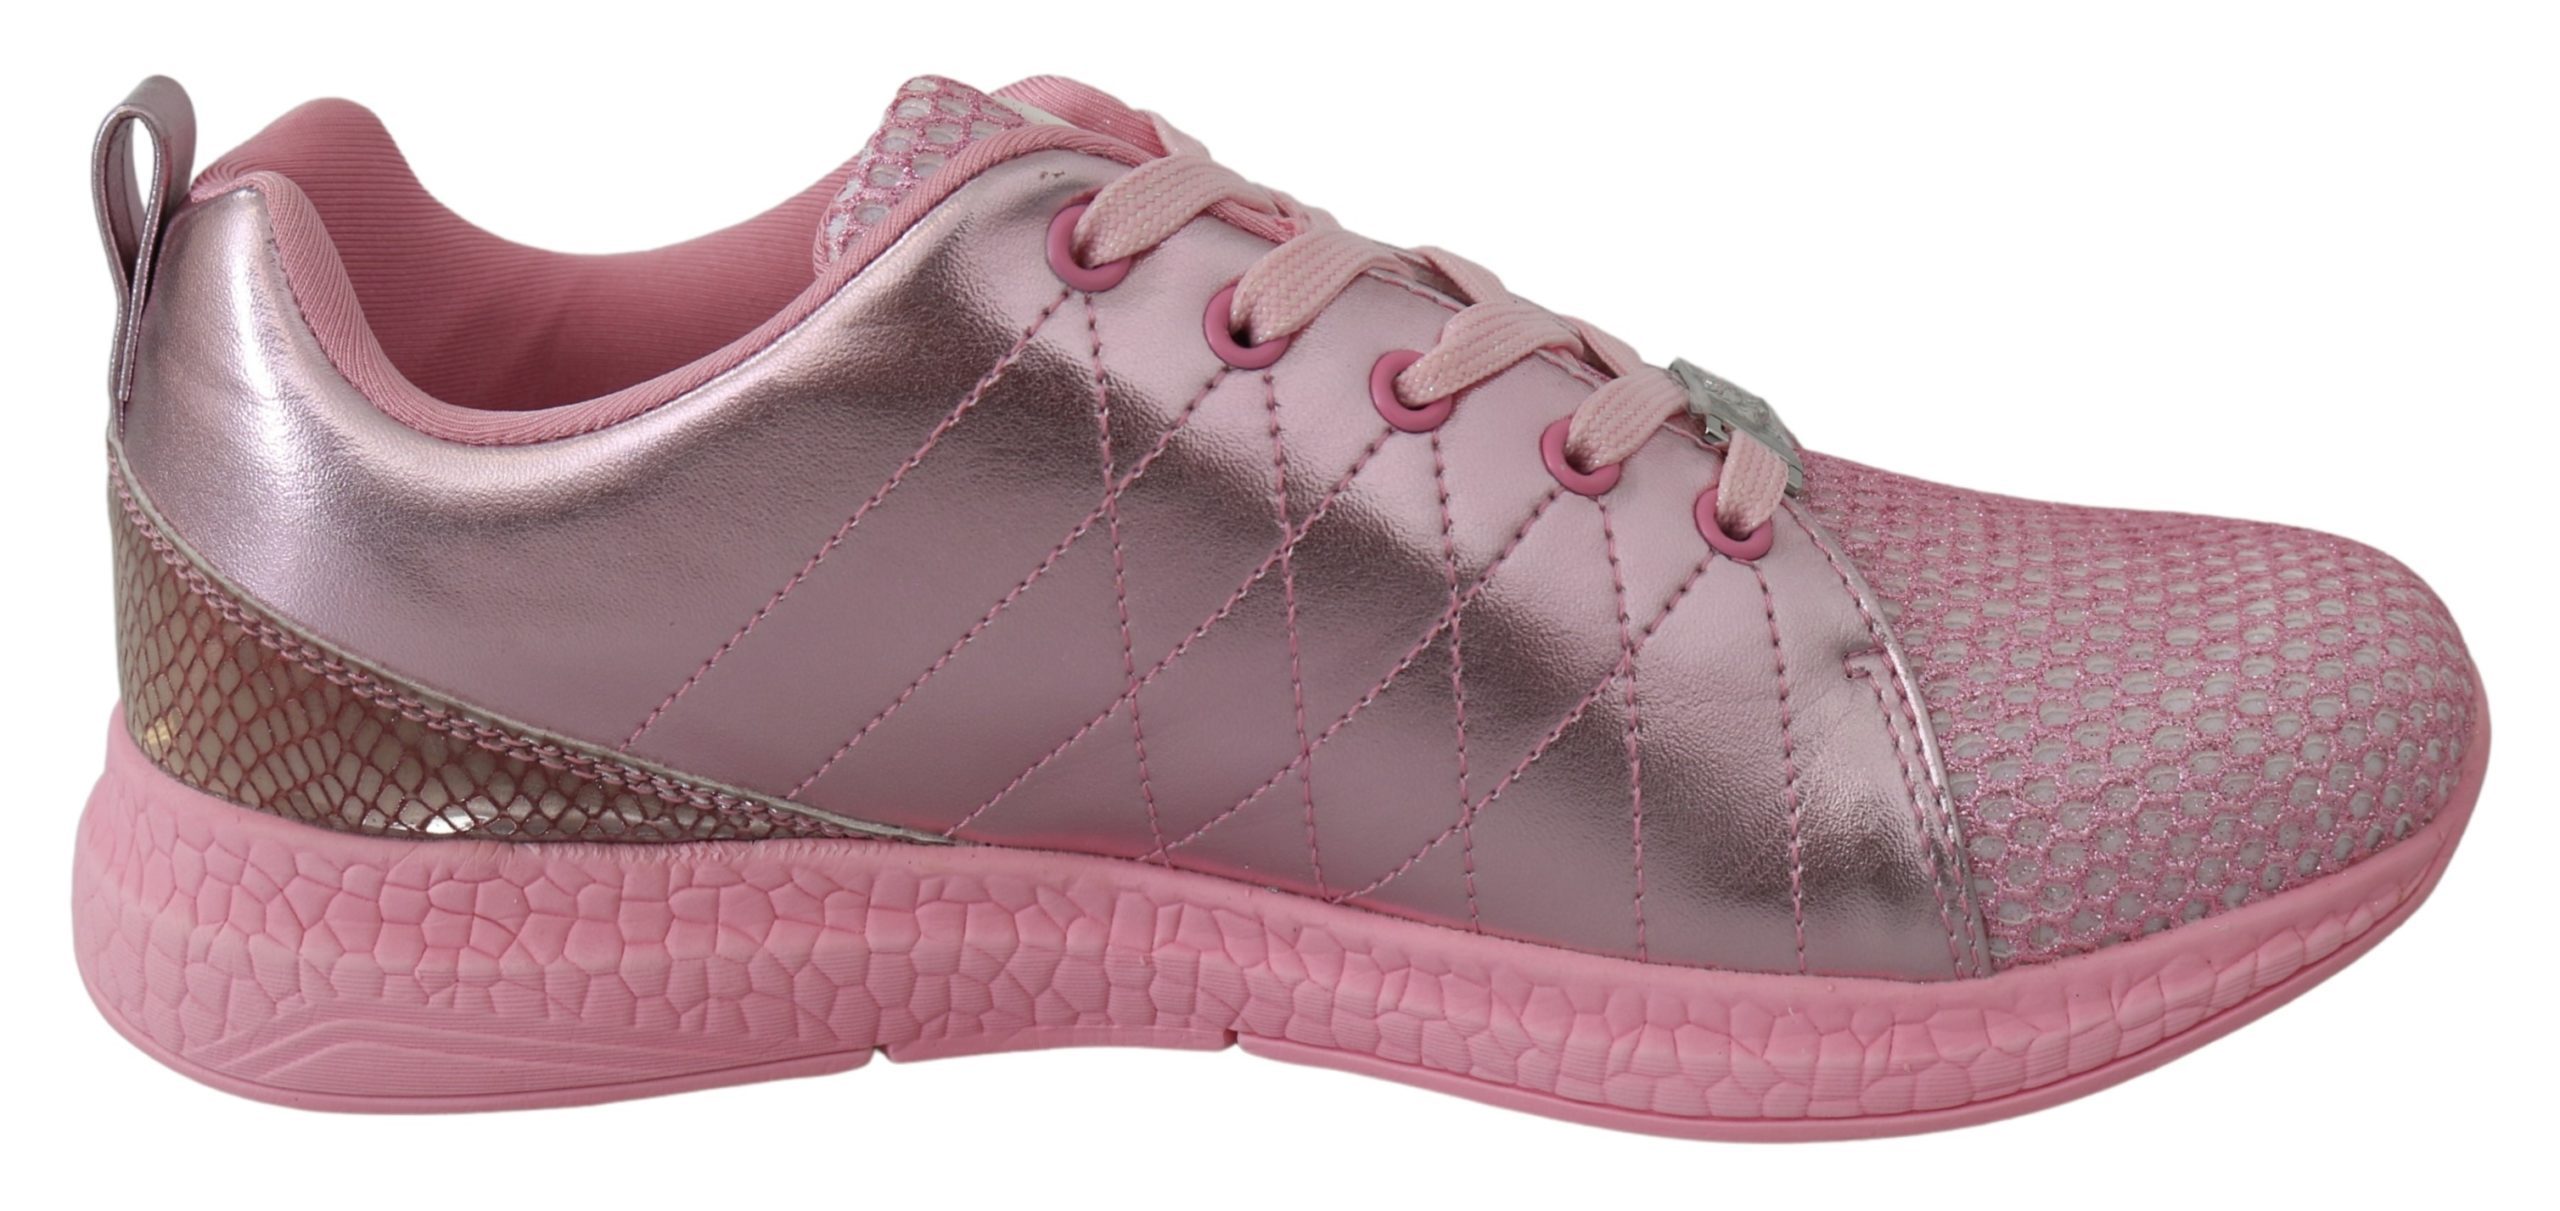 Pink Blush Polyester Runner Gisella Sneakers Shoes - EU36/US6